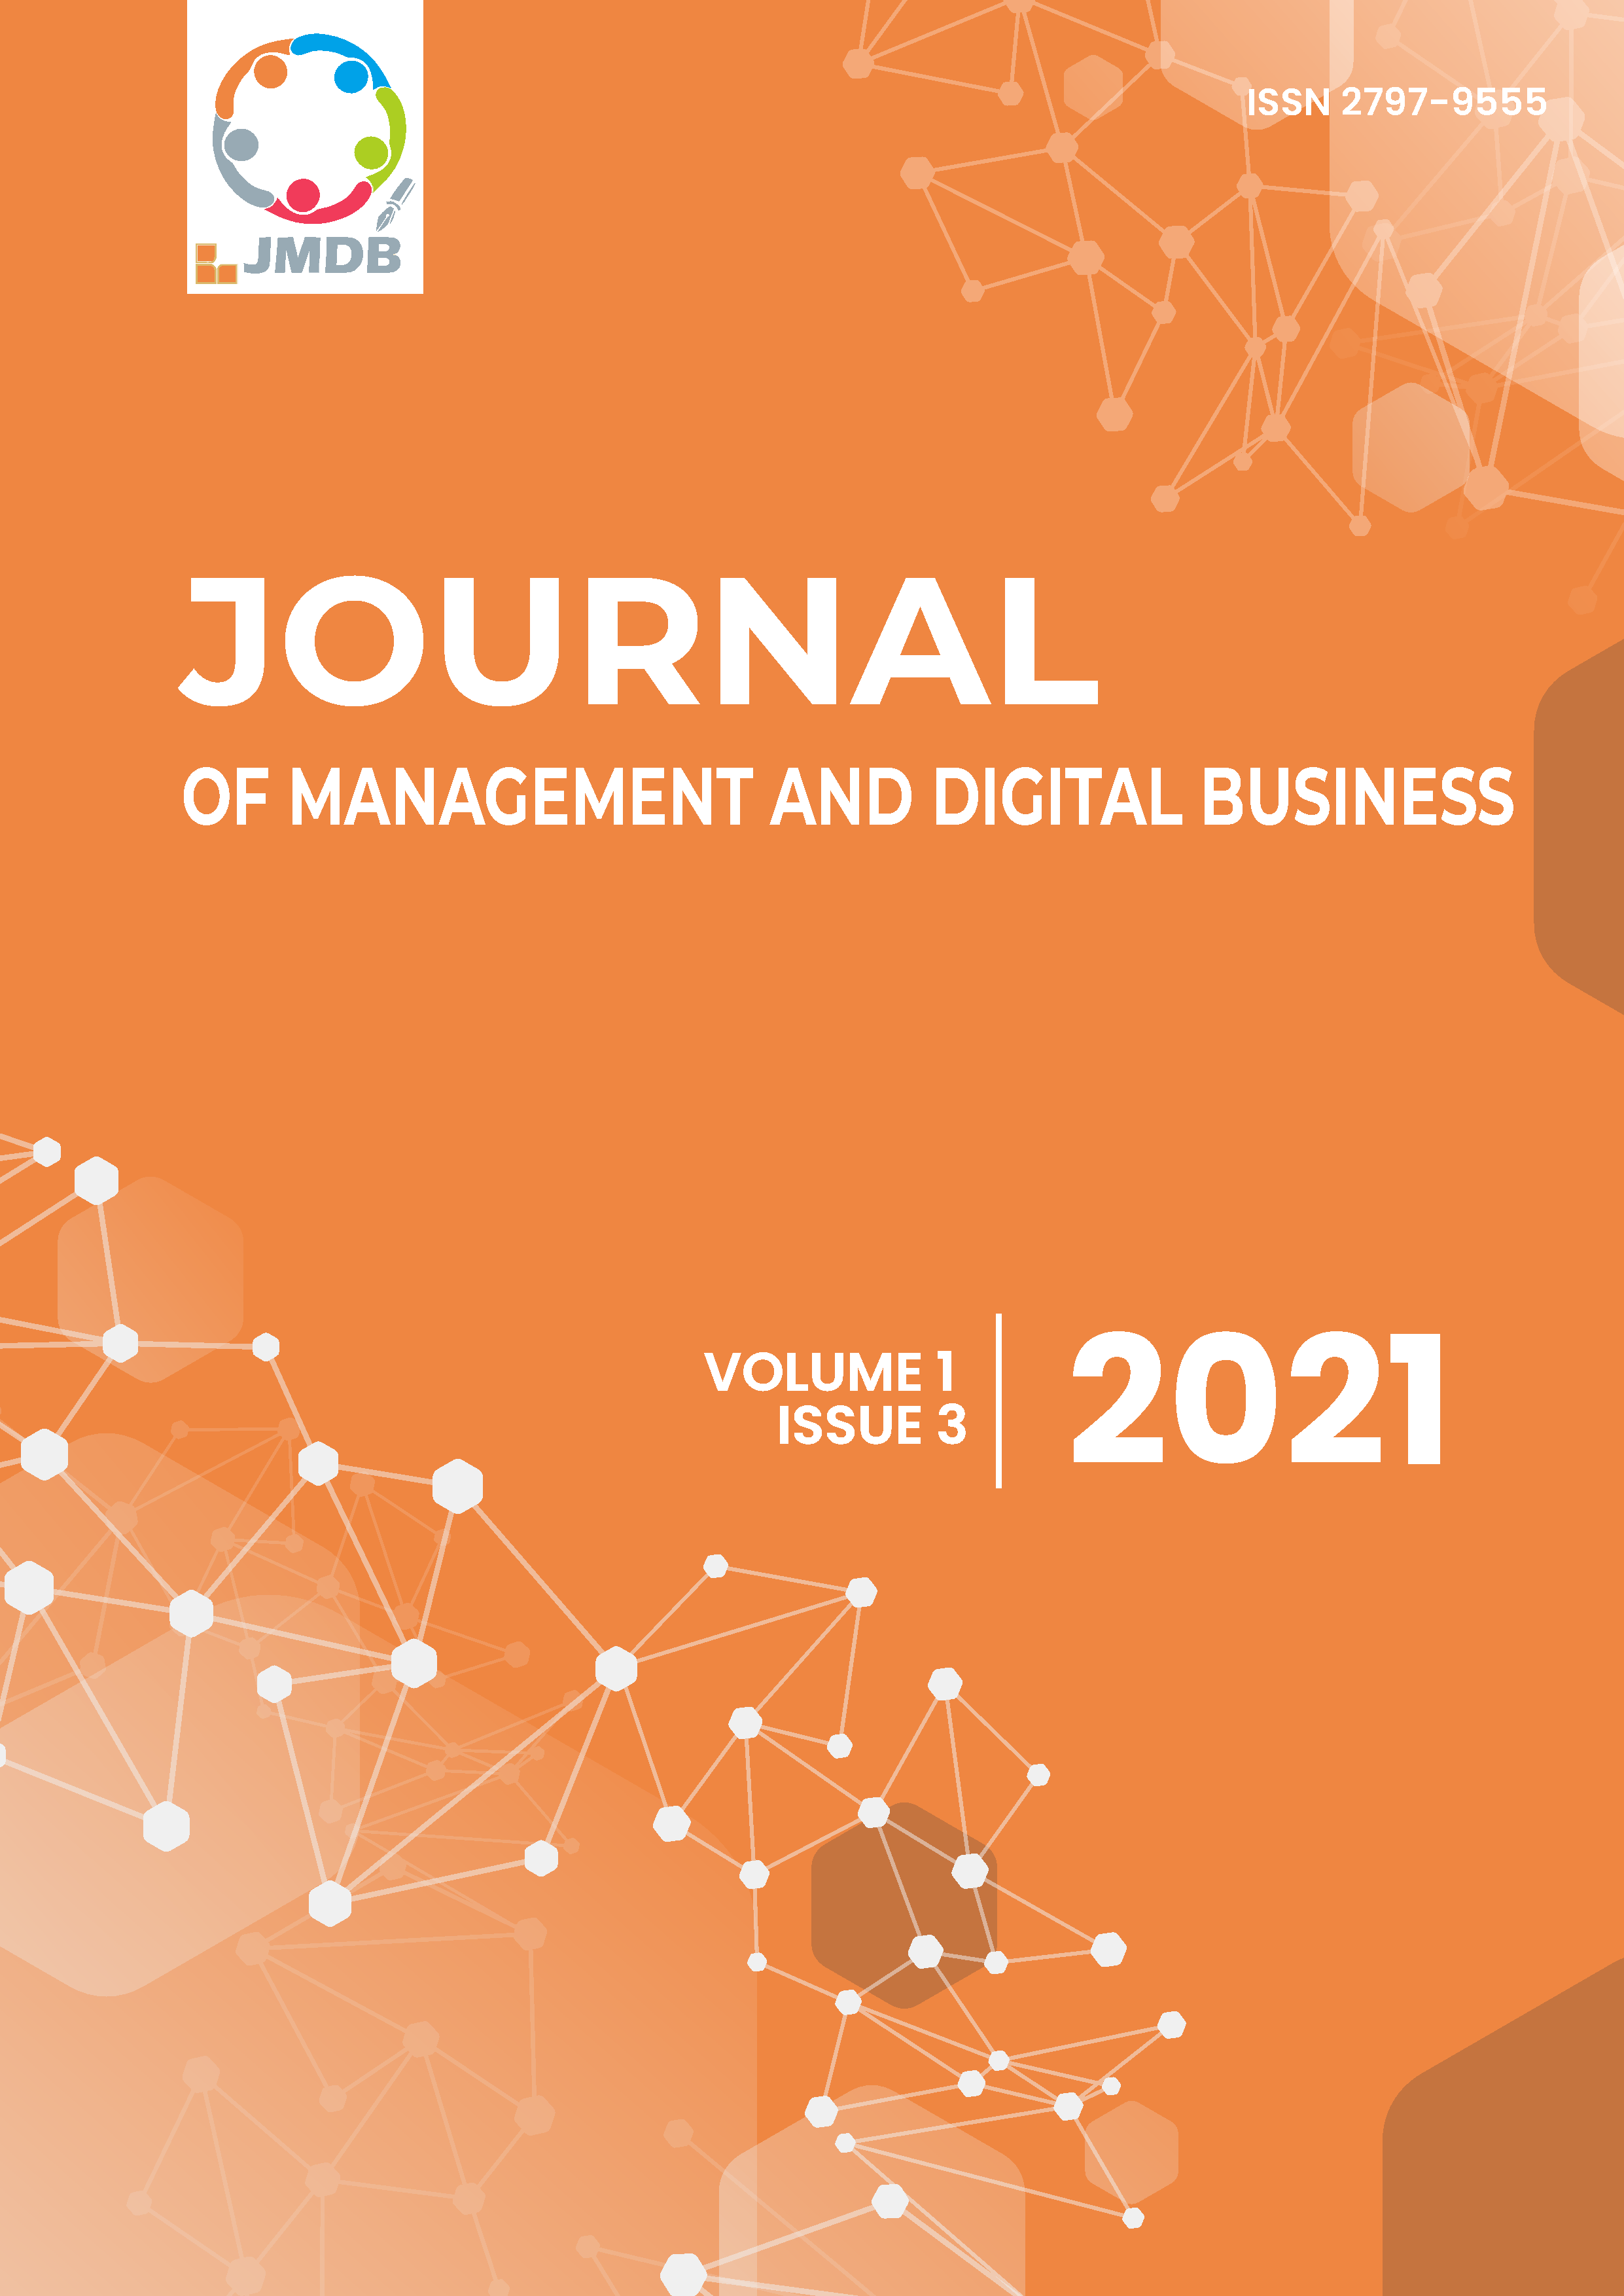 					View Vol. 1 No. 3 (2021): Journal of Management and Digital Business
				